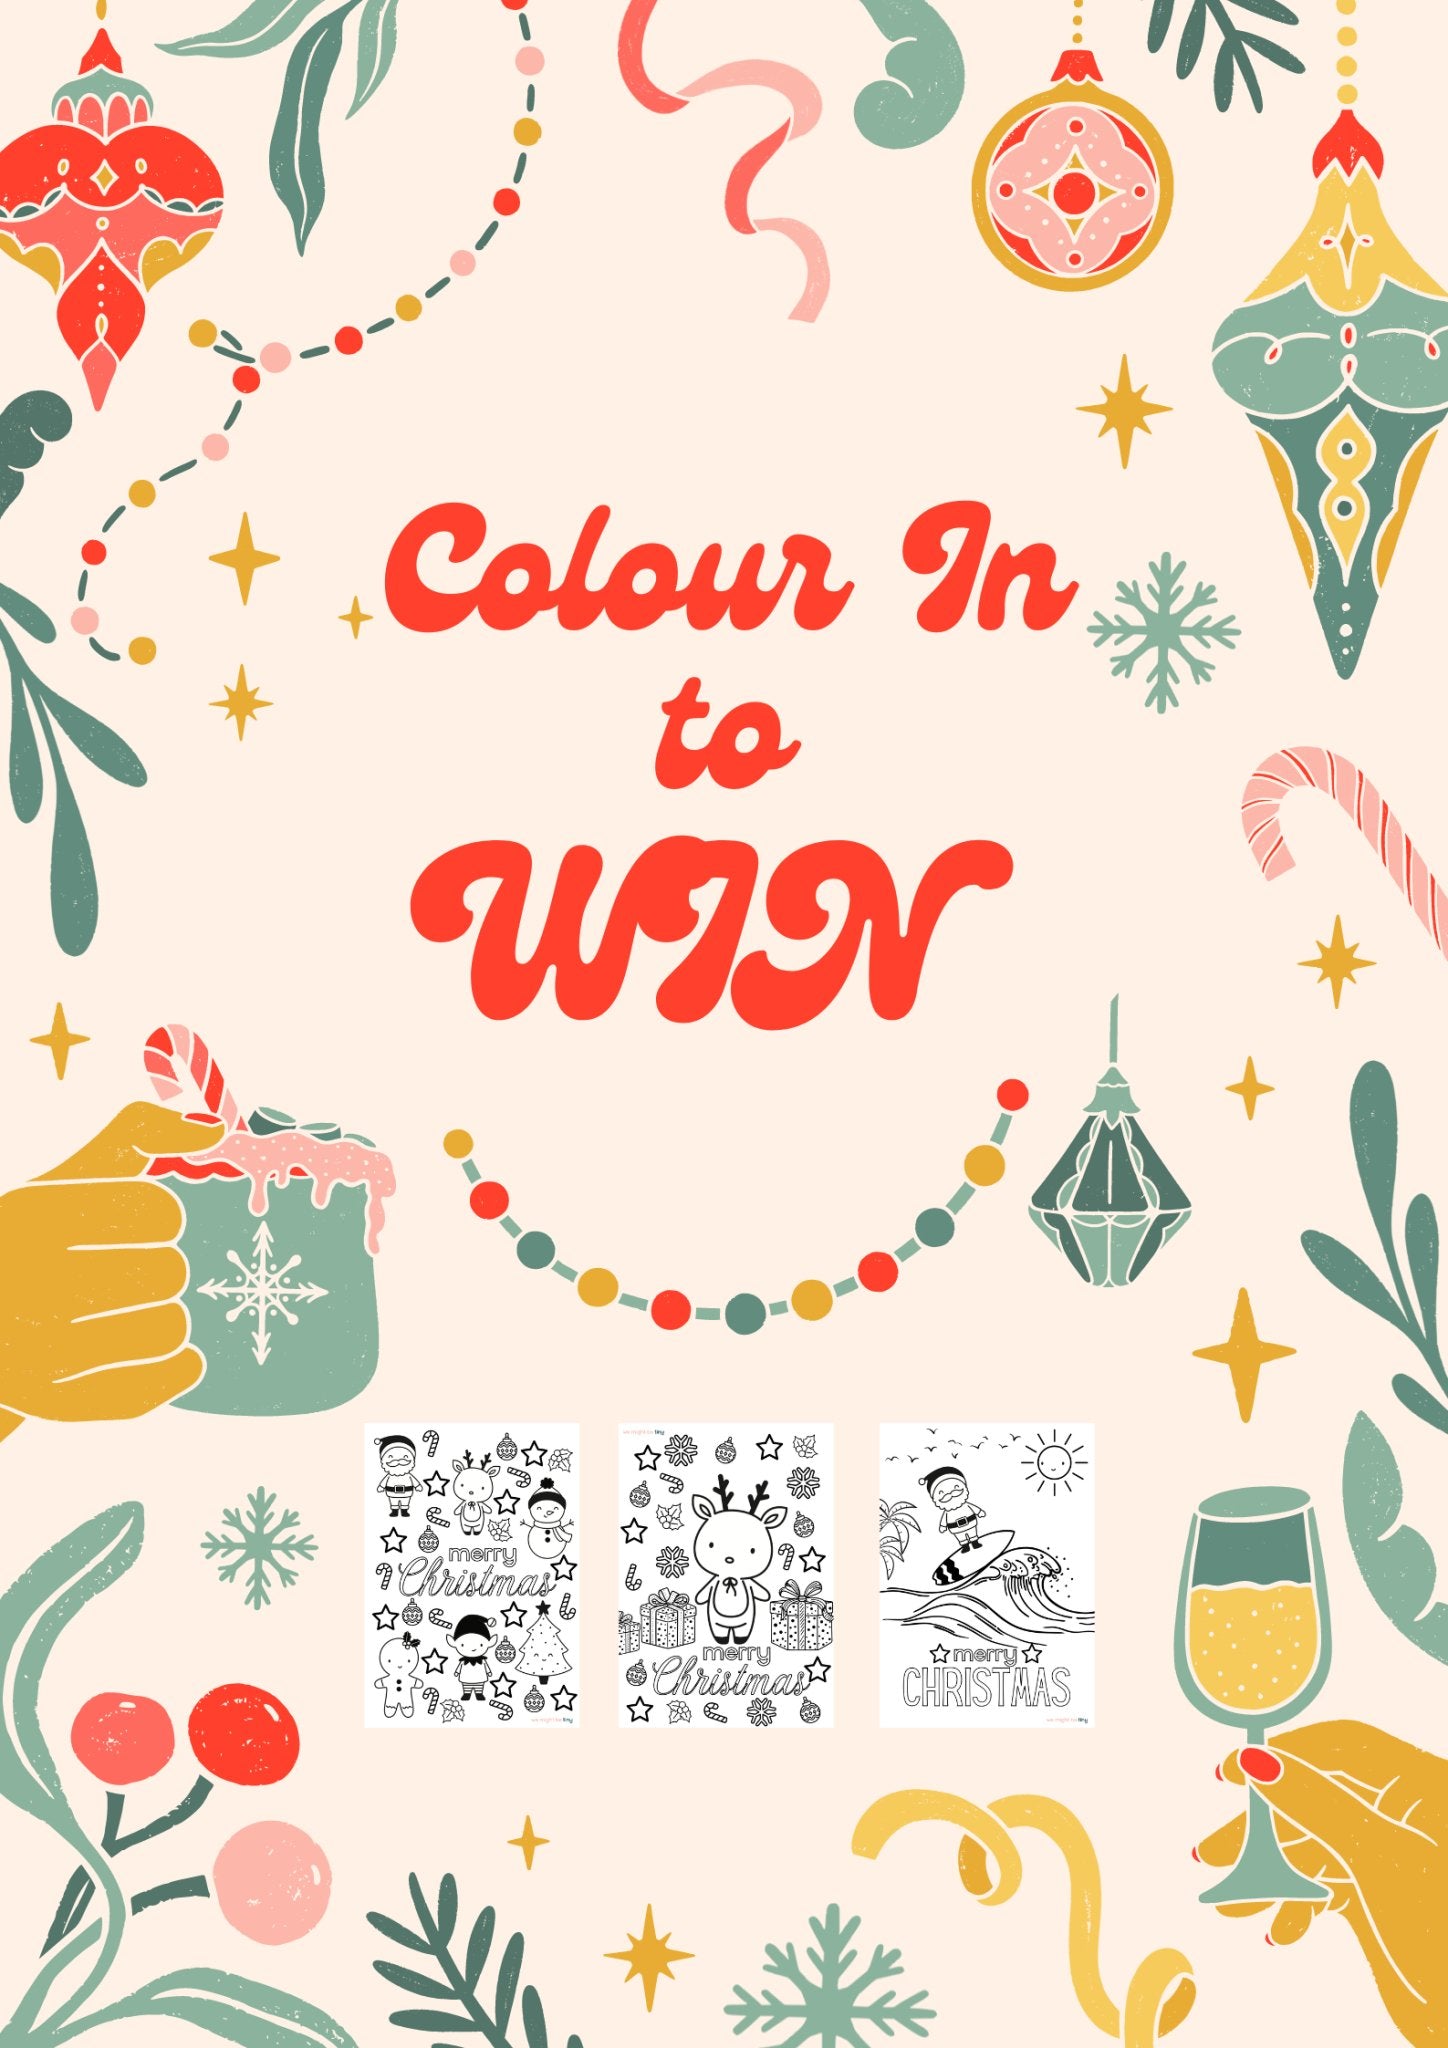 Colour-In to WIN!